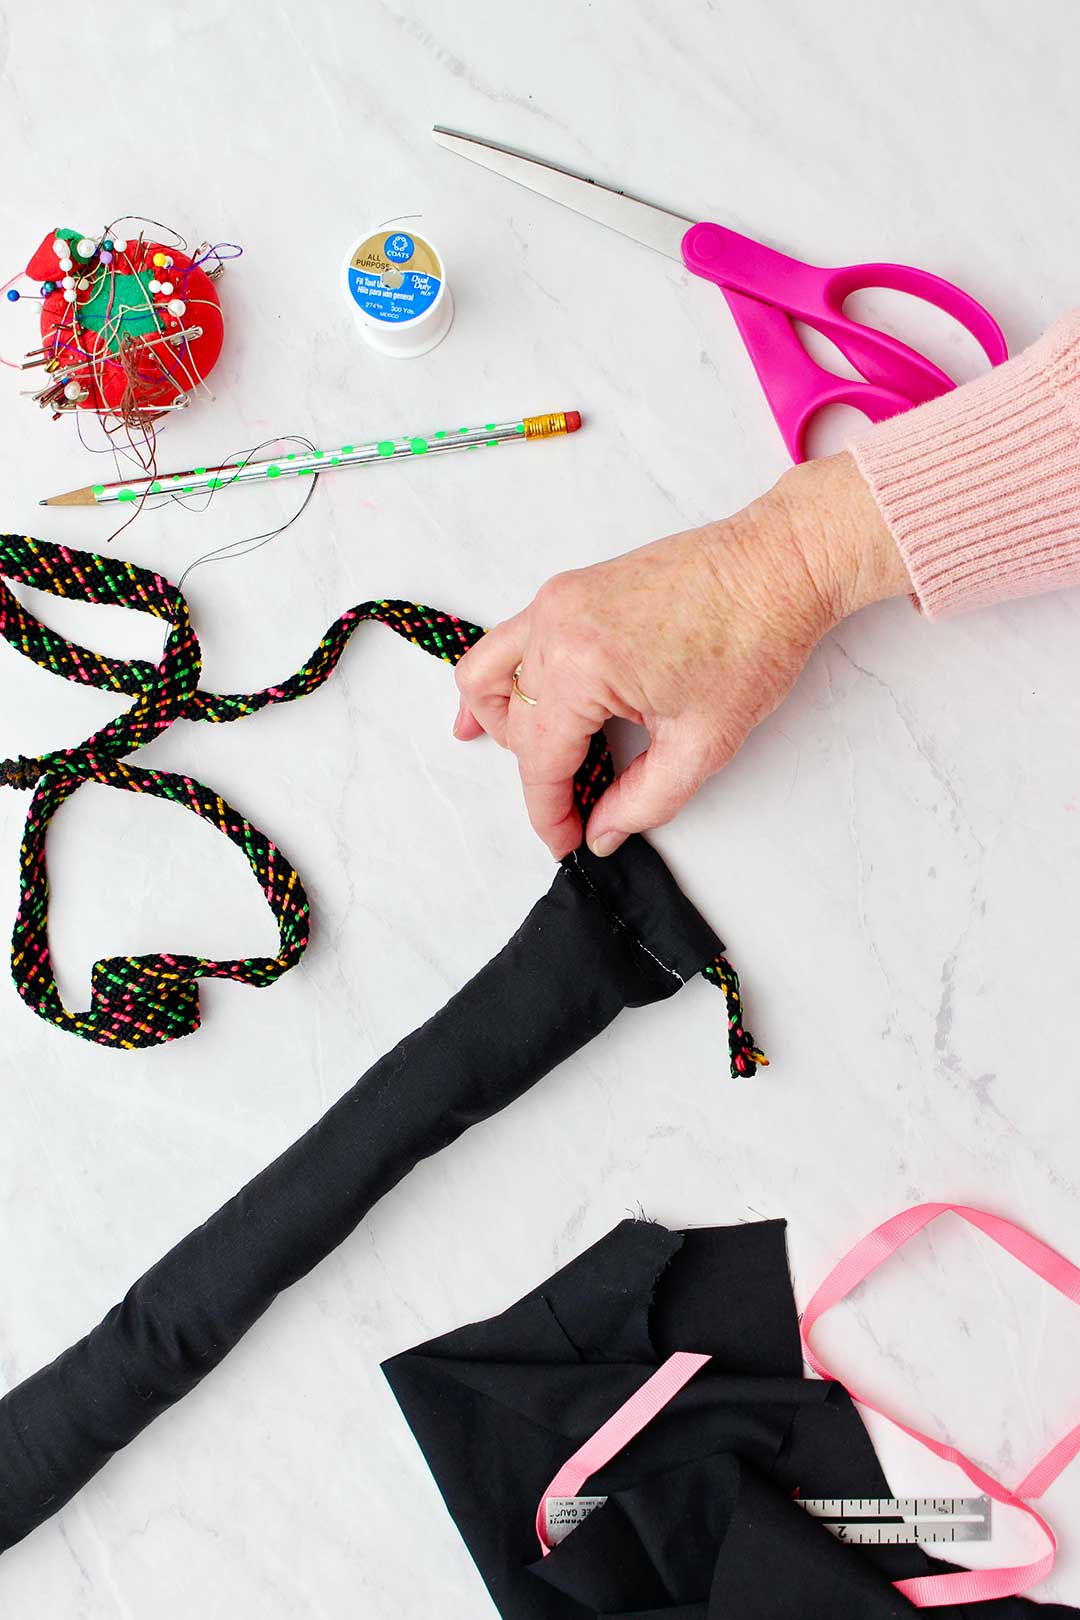 Hand threading colorful rope through a sewn loop in black cat tail for costume.